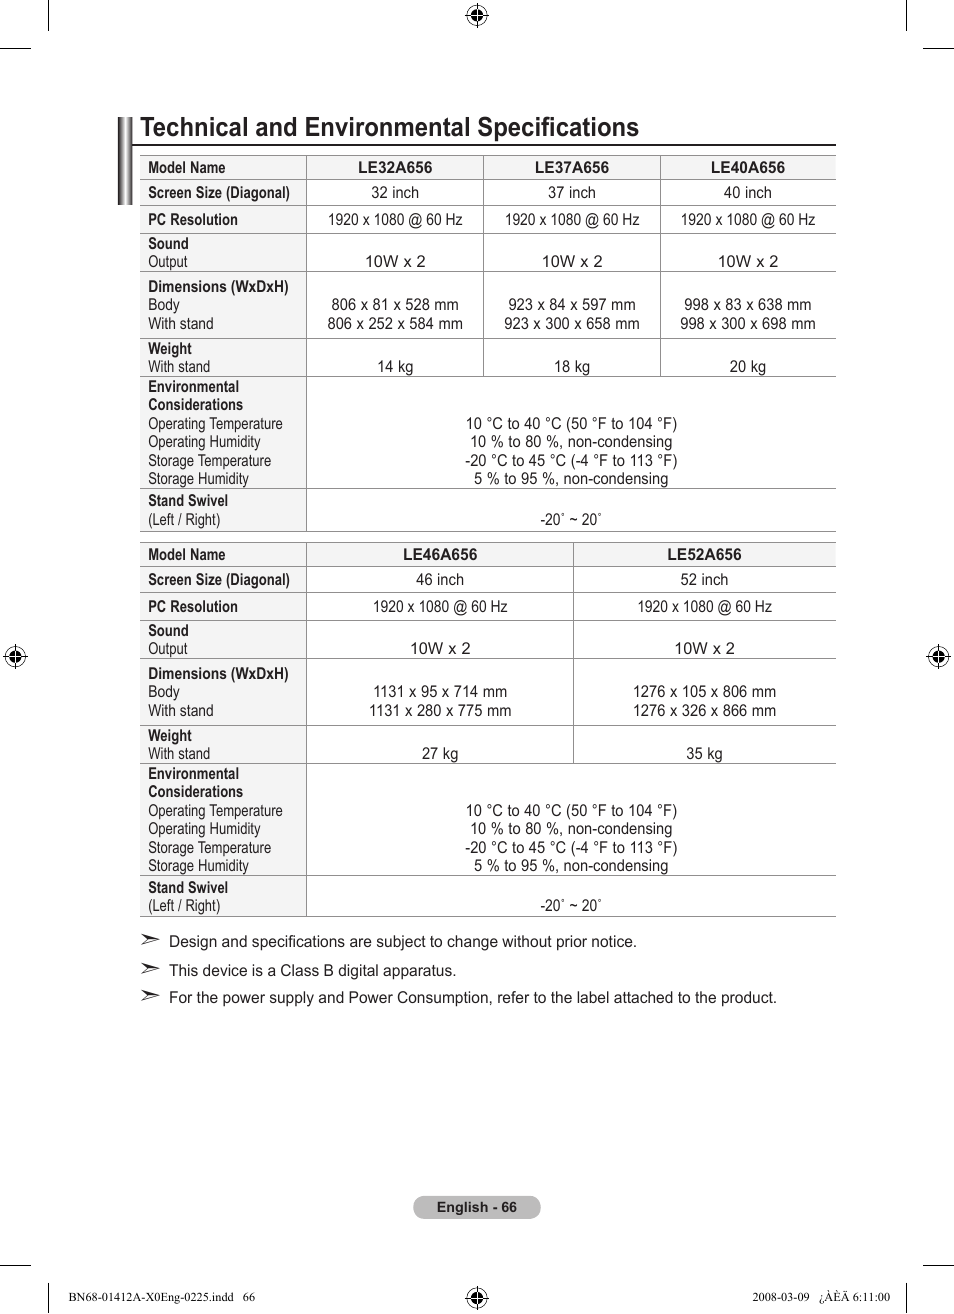 Technical and environmental specifications | Samsung LE37A656A1F User Manual  | Page 68 / 546